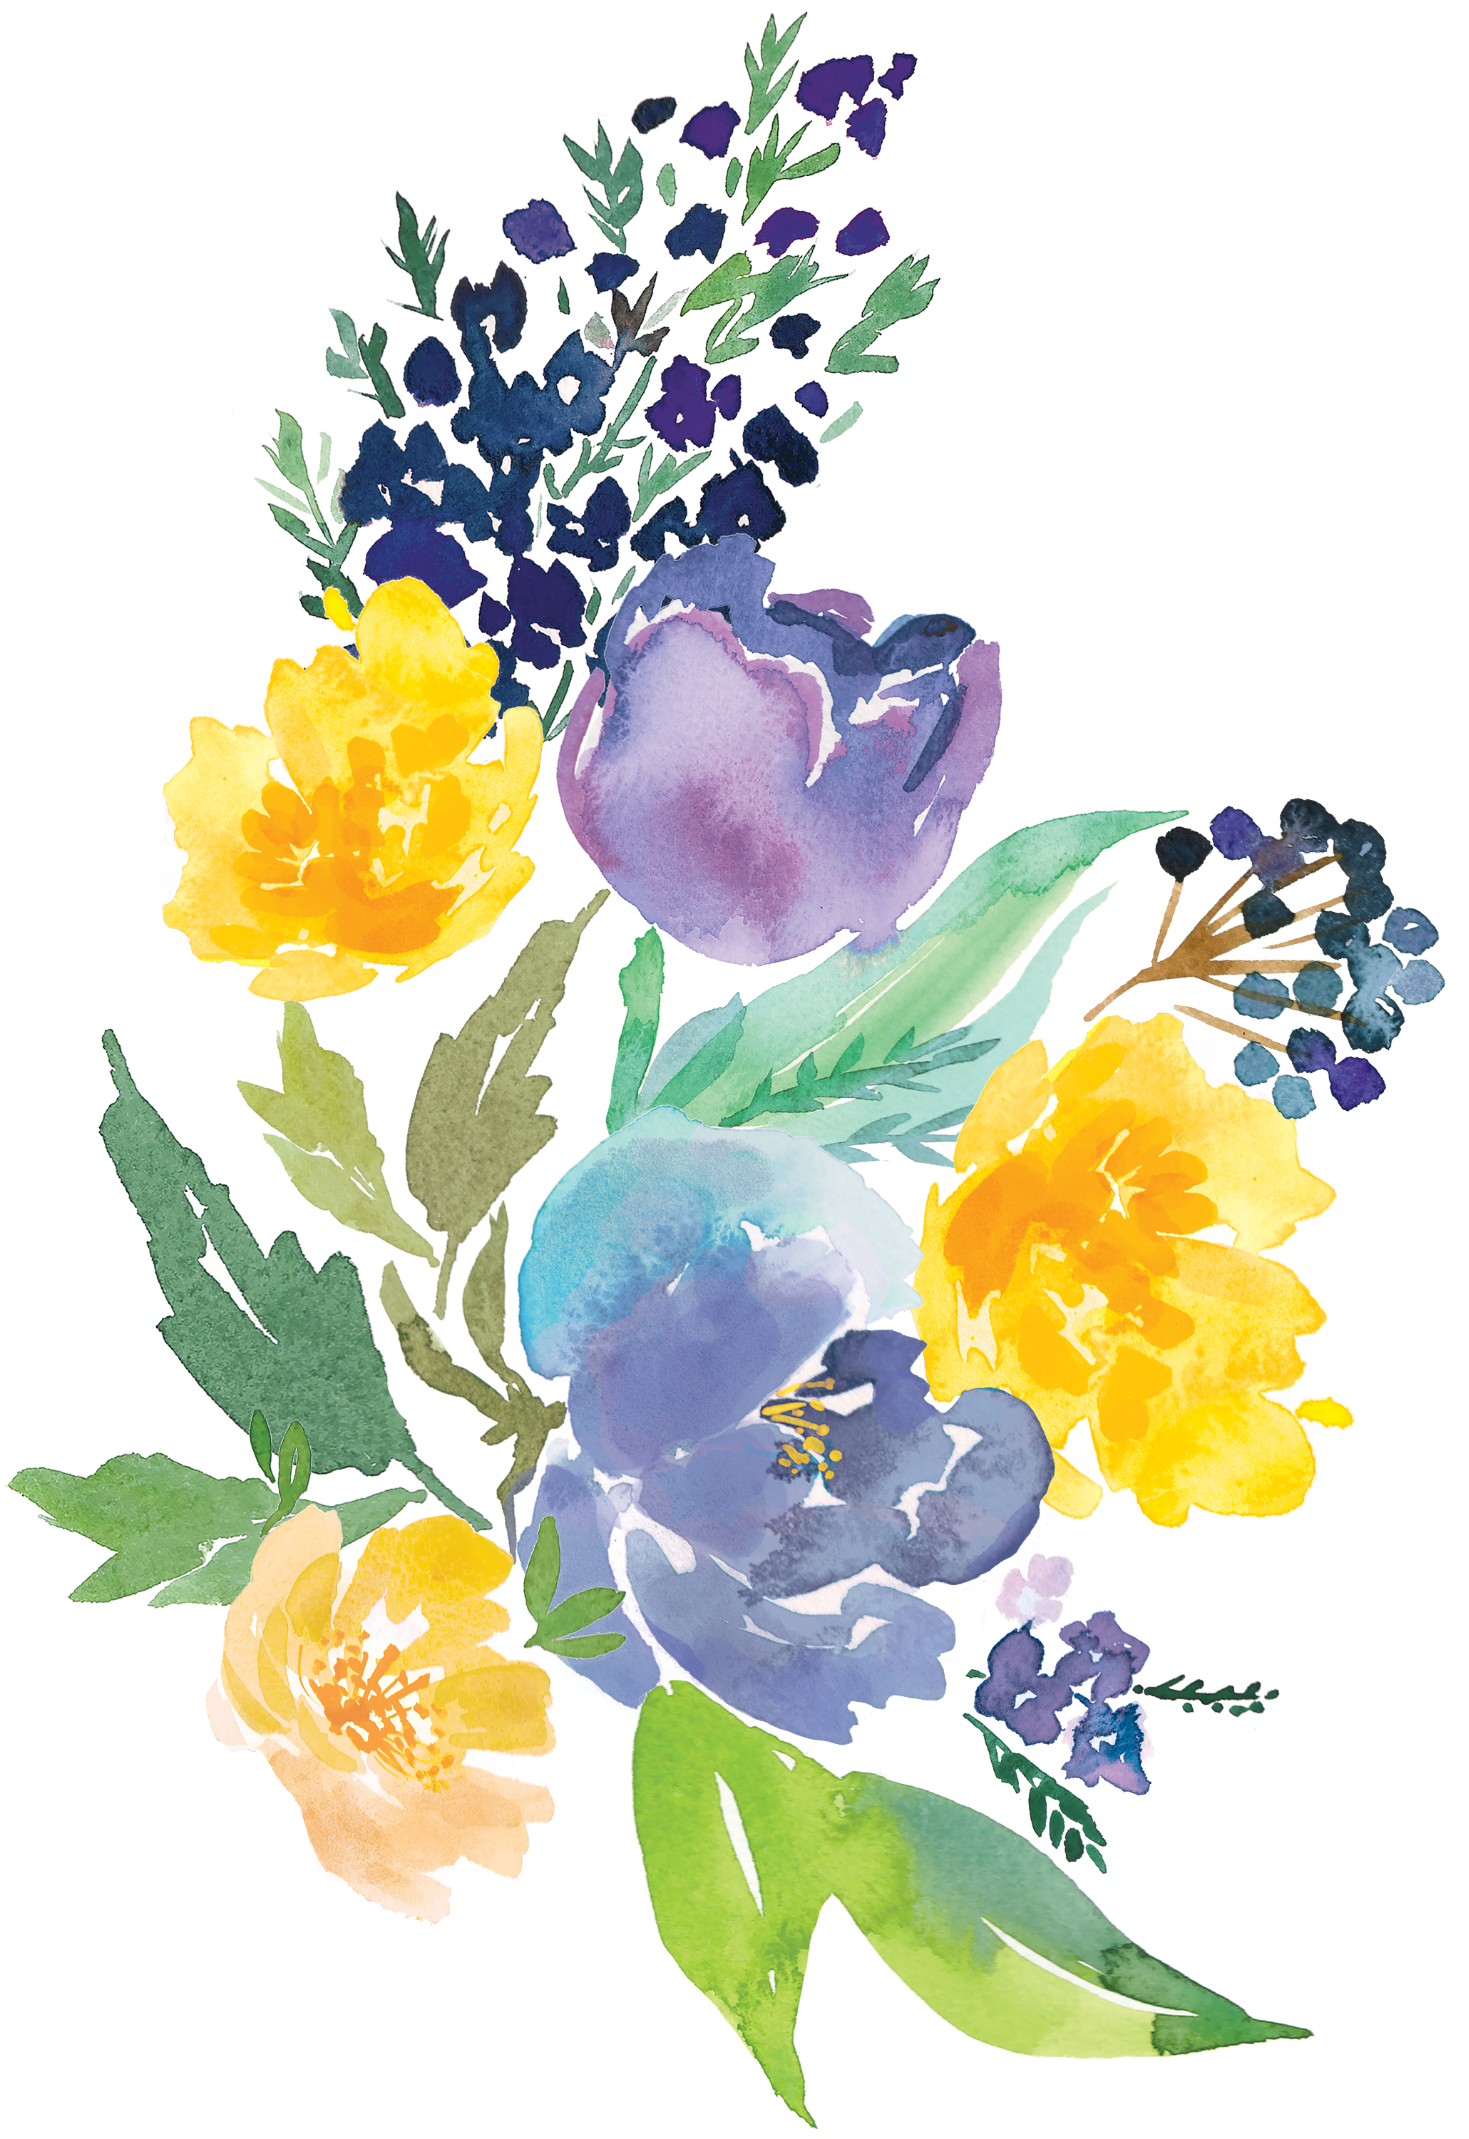 This visual is about watercolor flowers freetoedit #watercolor #flowers.